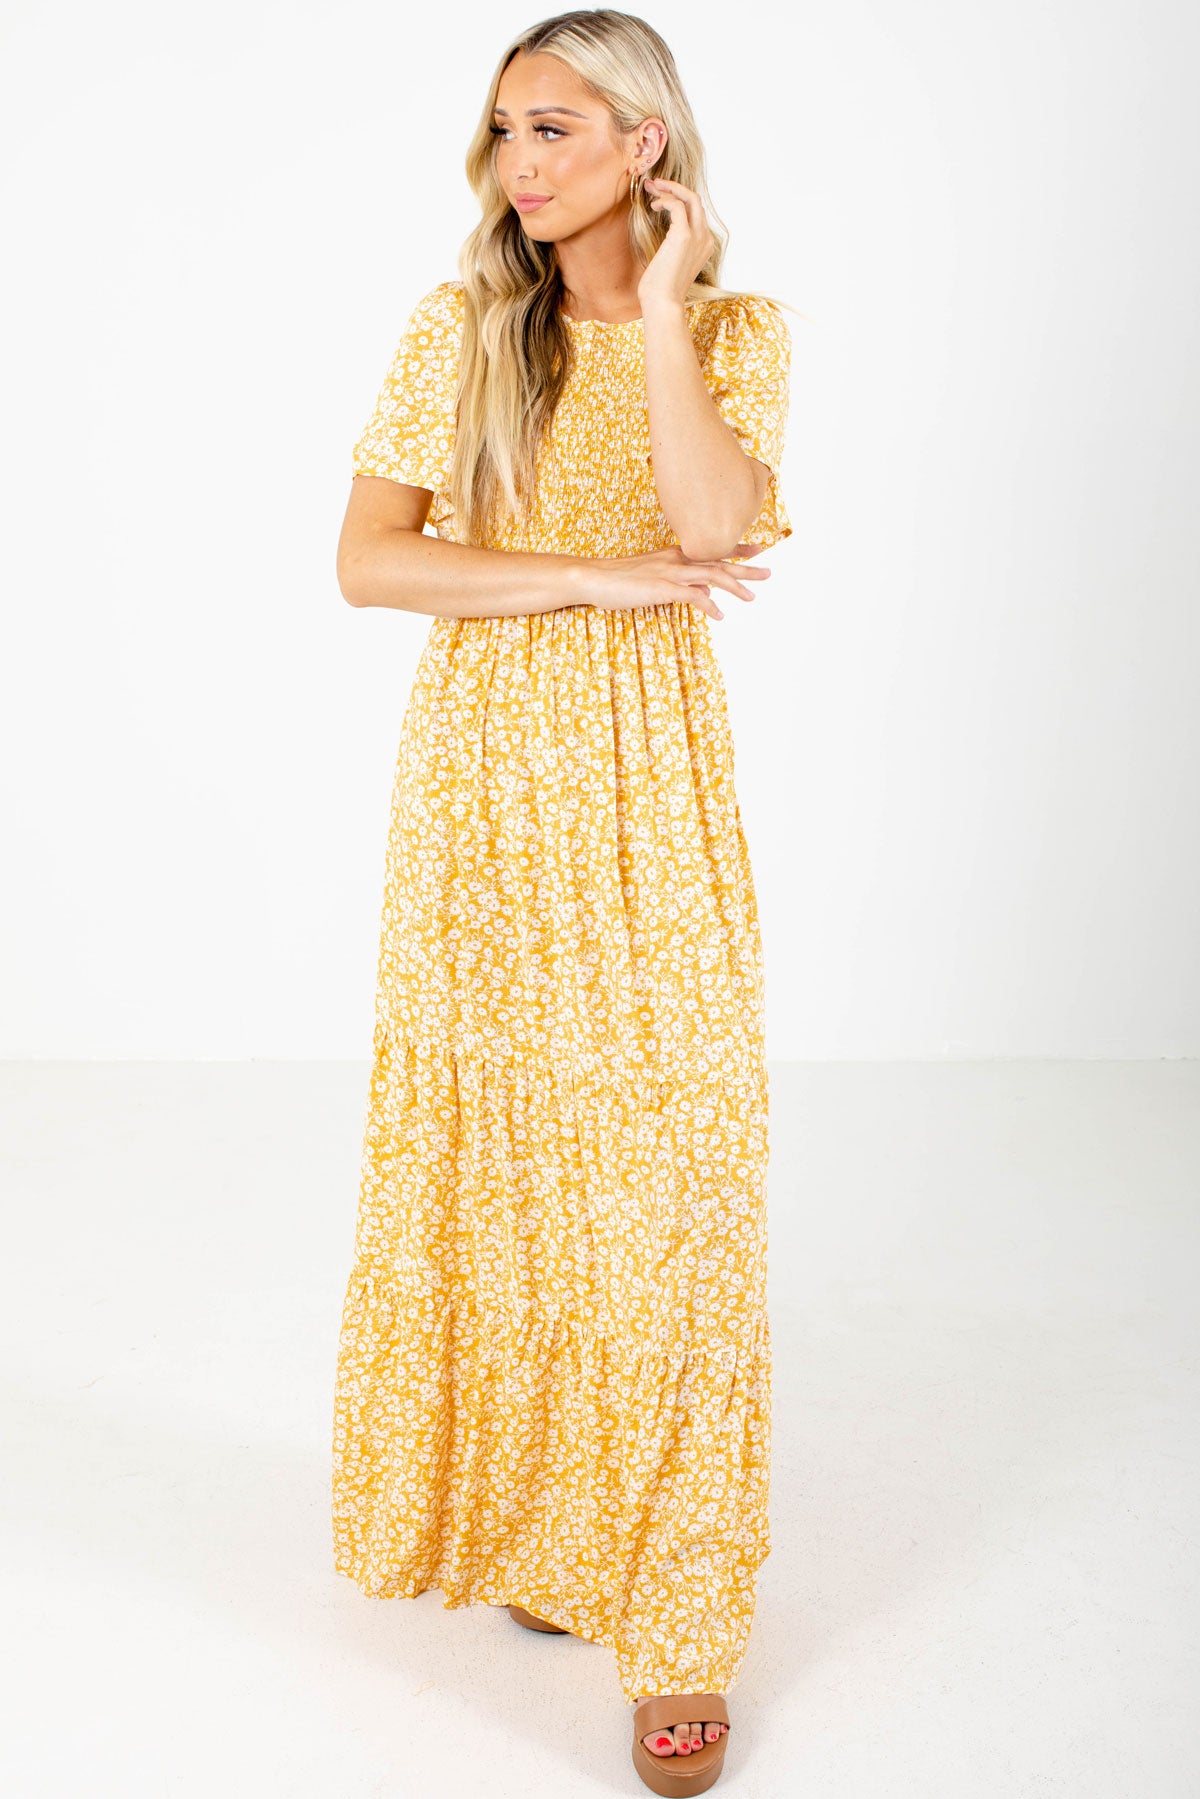 Yellow Self-Tie Back Accent Boutique Maxi Dresses for Women